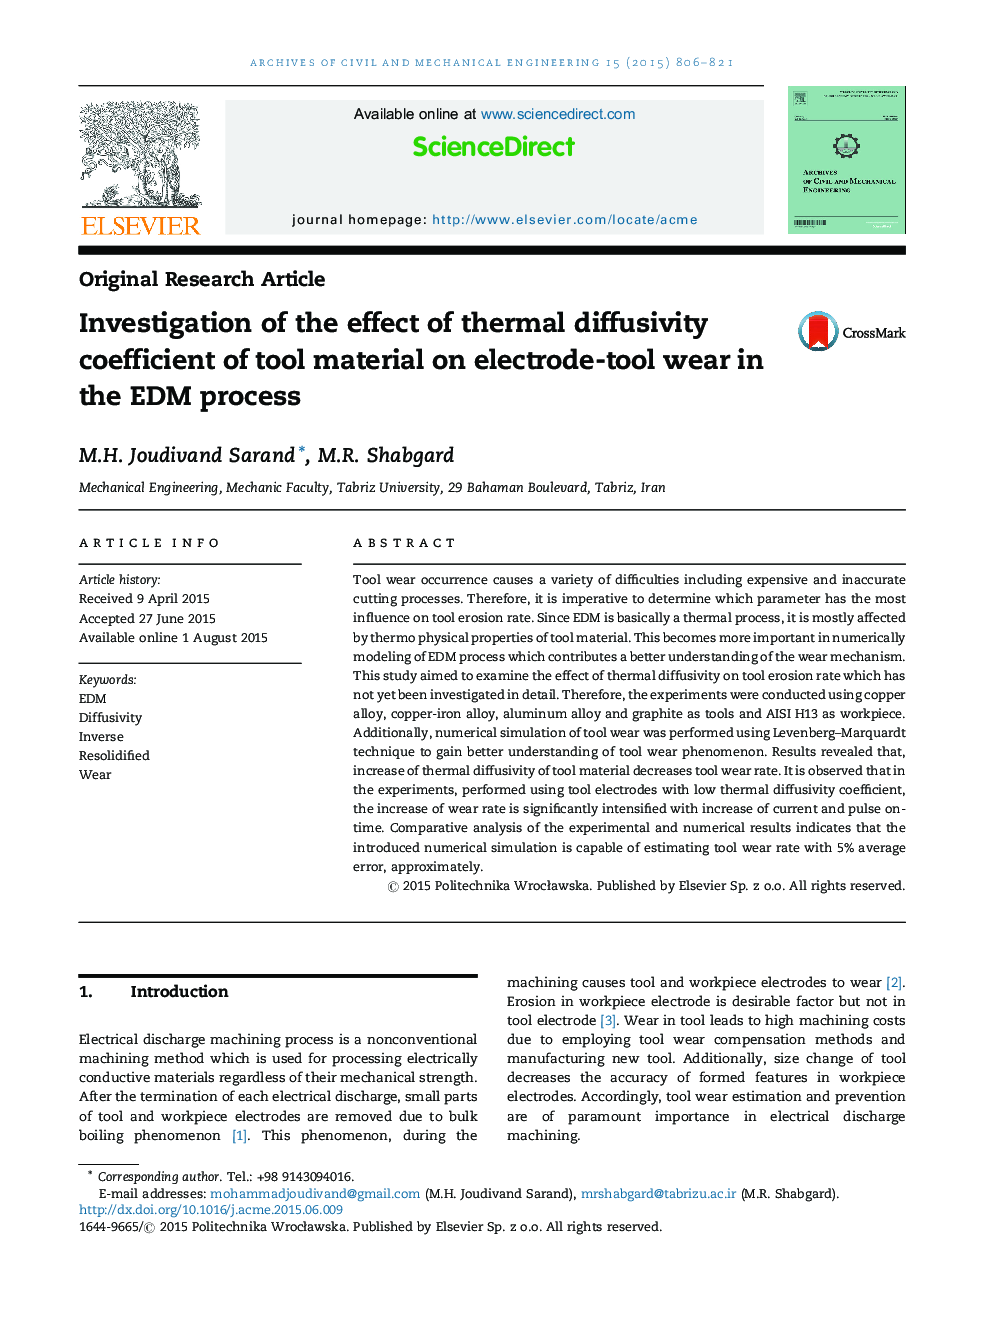 Investigation of the effect of thermal diffusivity coefficient of tool material on electrode-tool wear in the EDM process